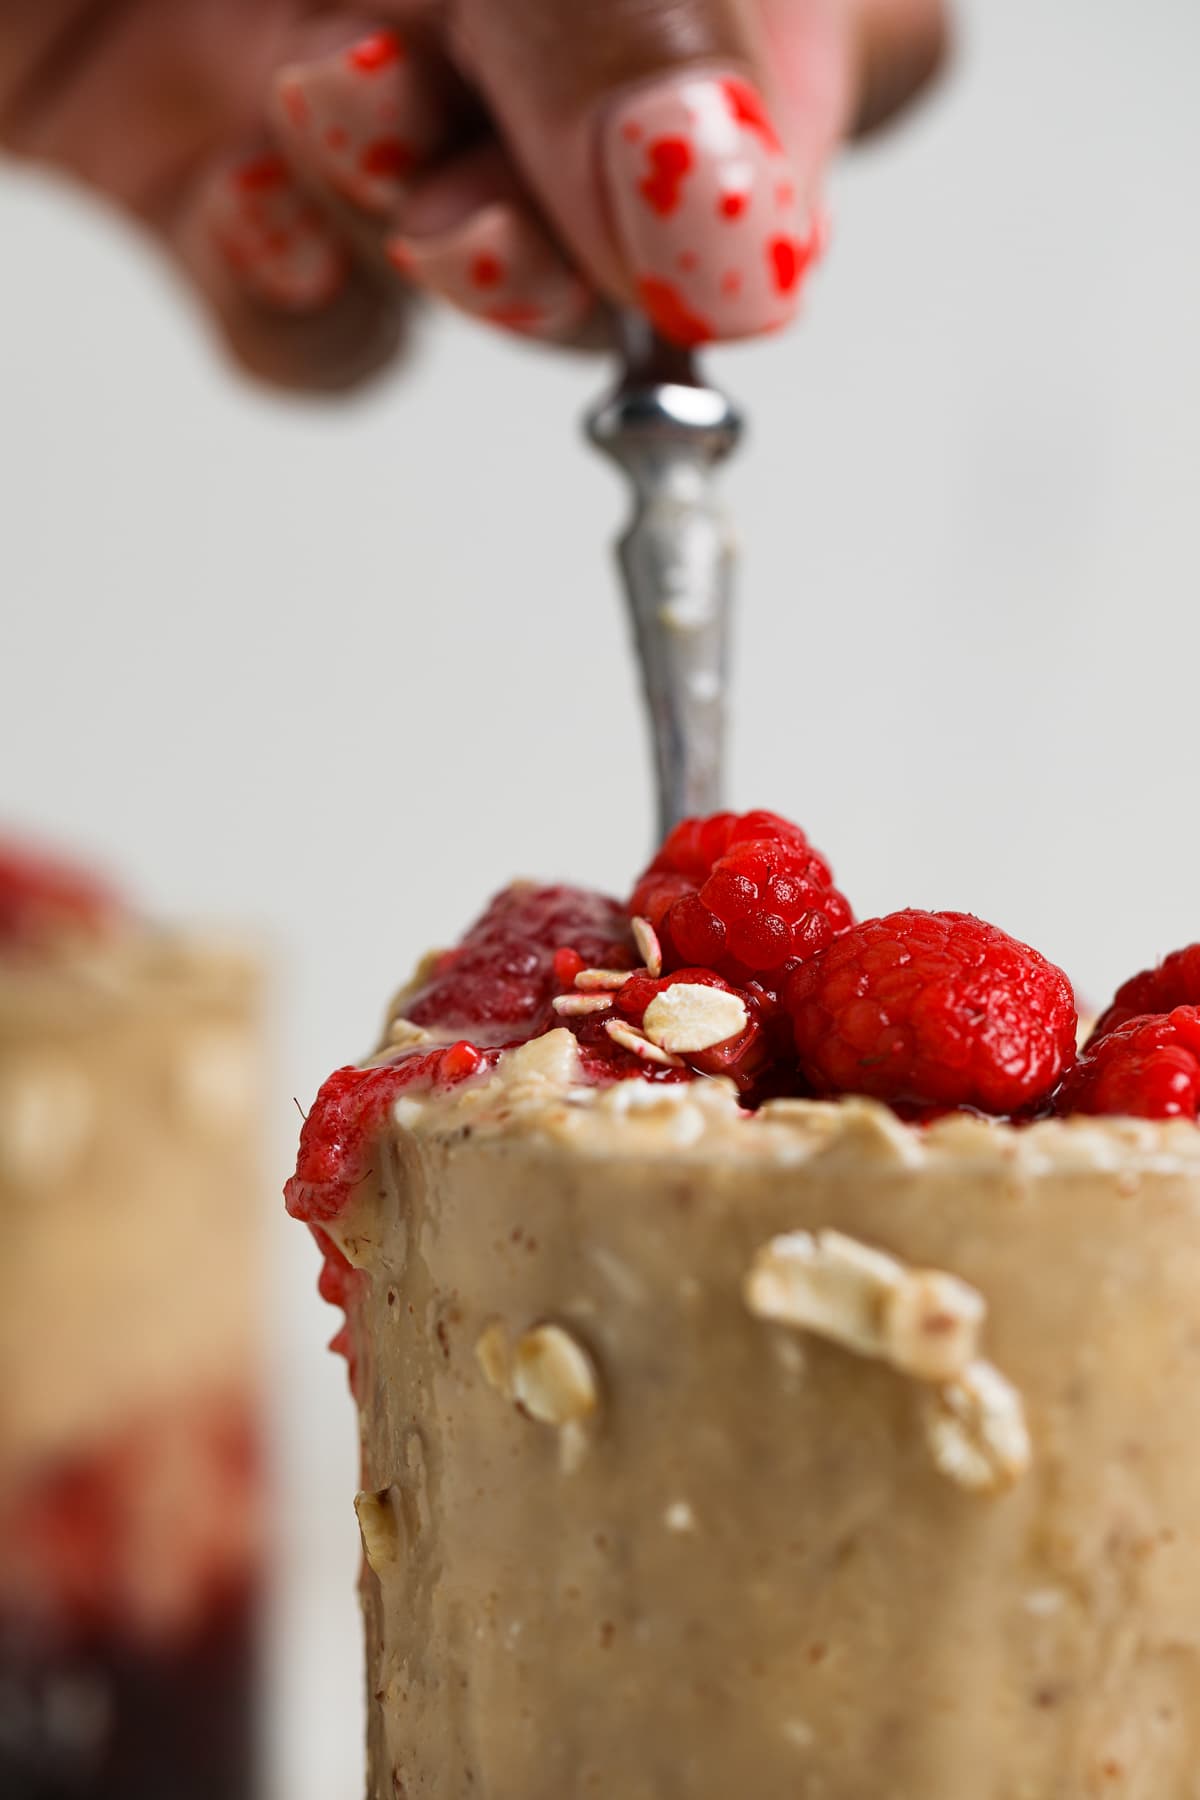 Protein Peanut Butter + Jelly Overnight Oats